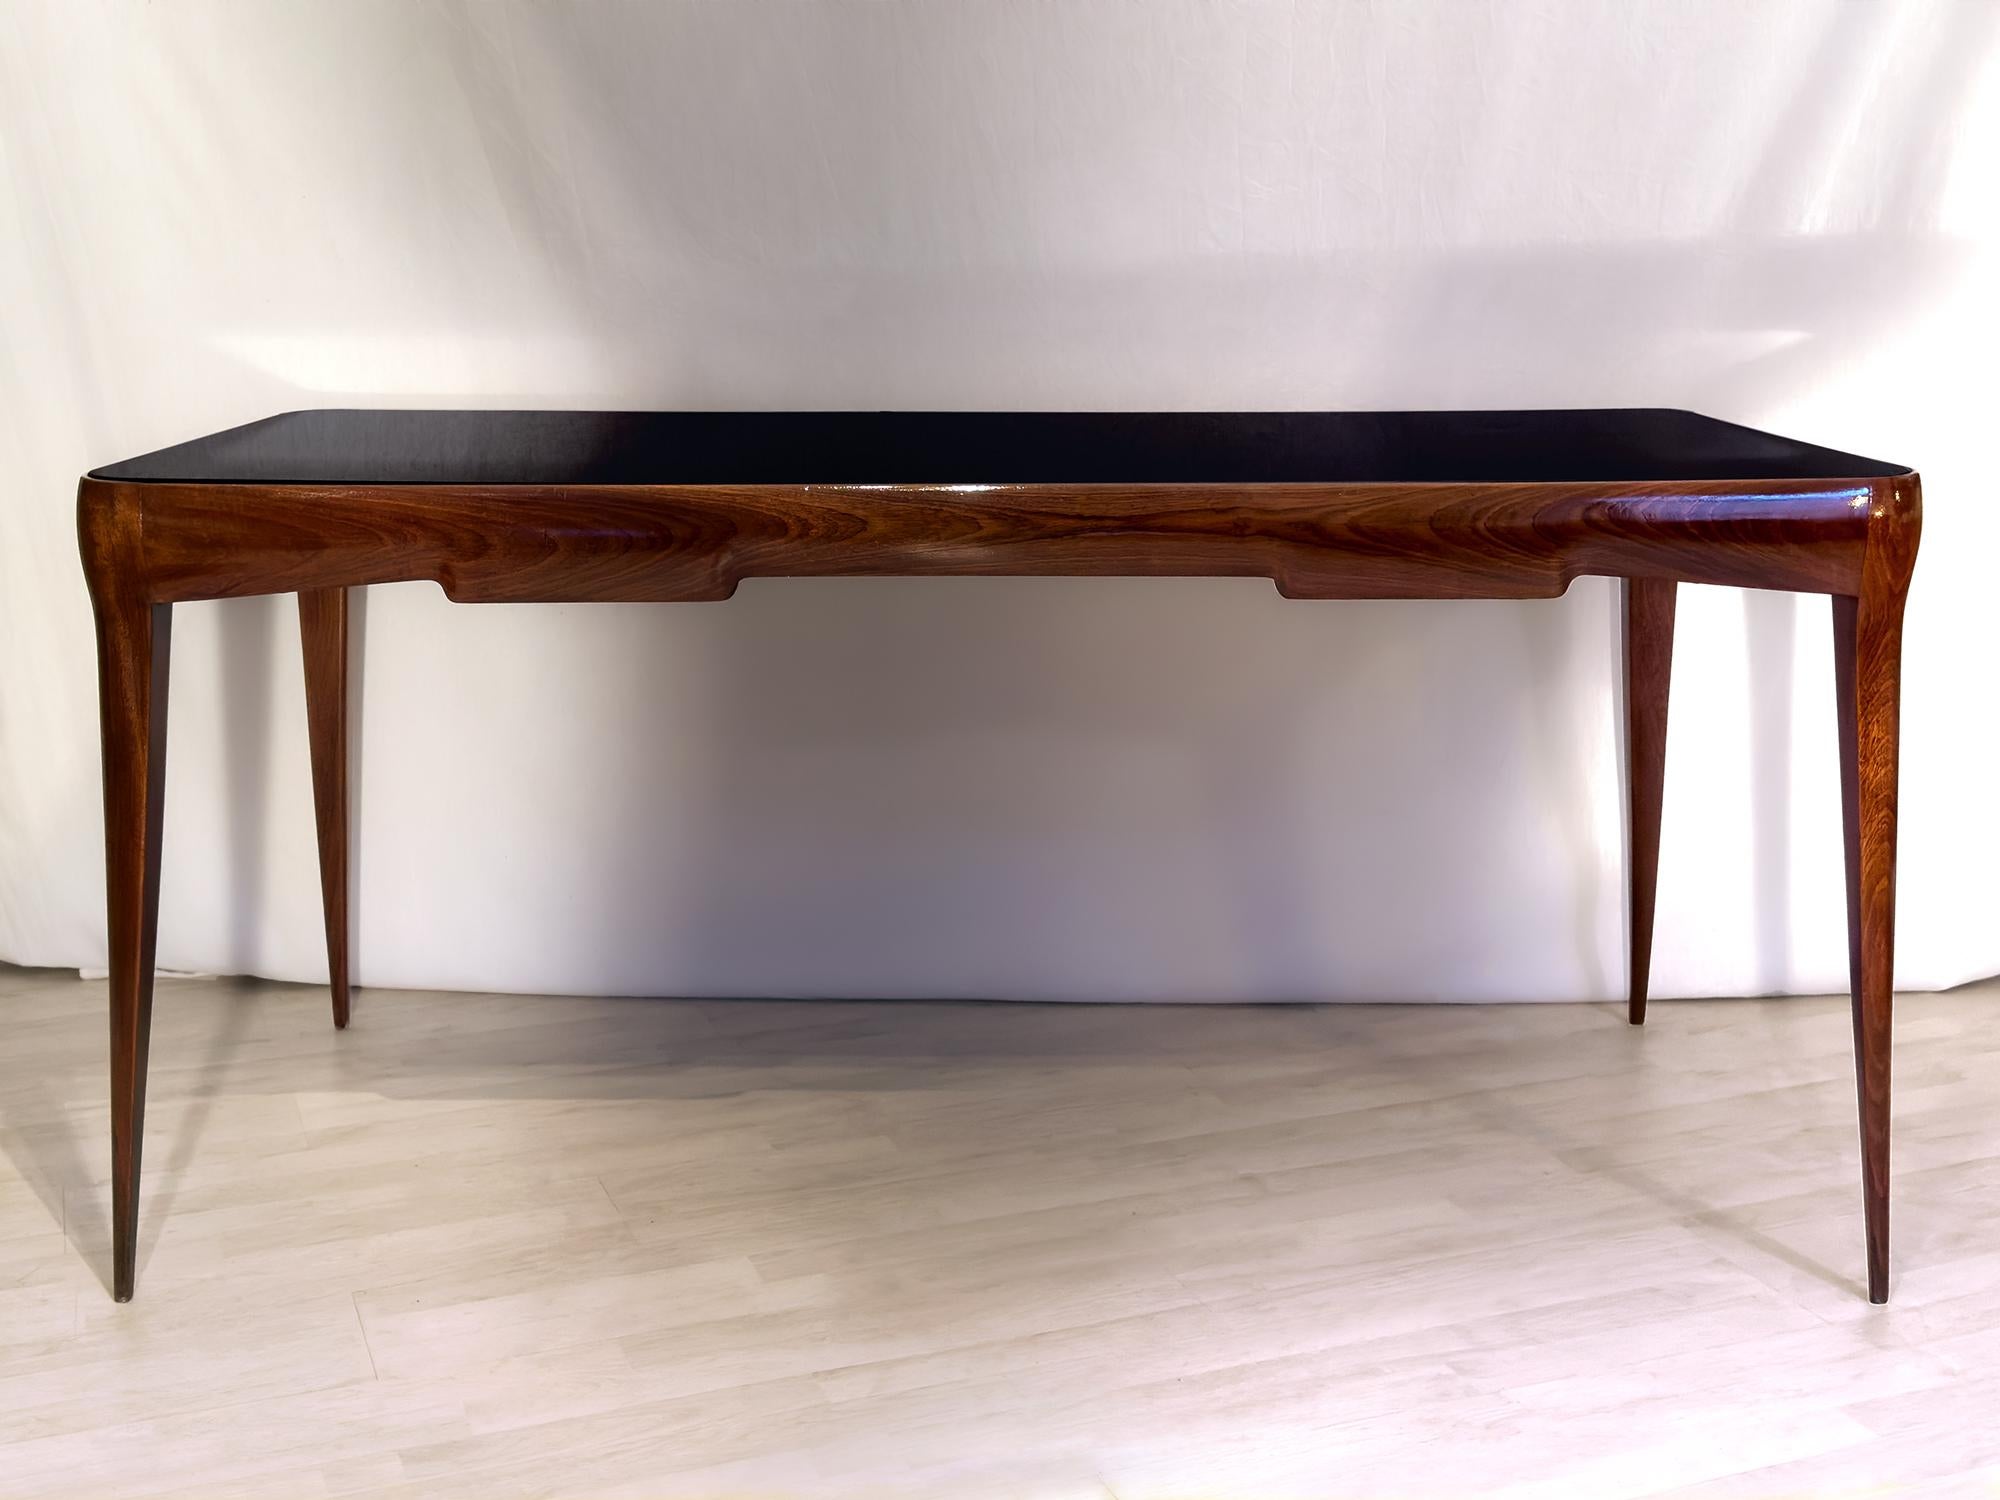 Italian Mid-Century Dining Table Gio Ponti style, 1950s For Sale 3